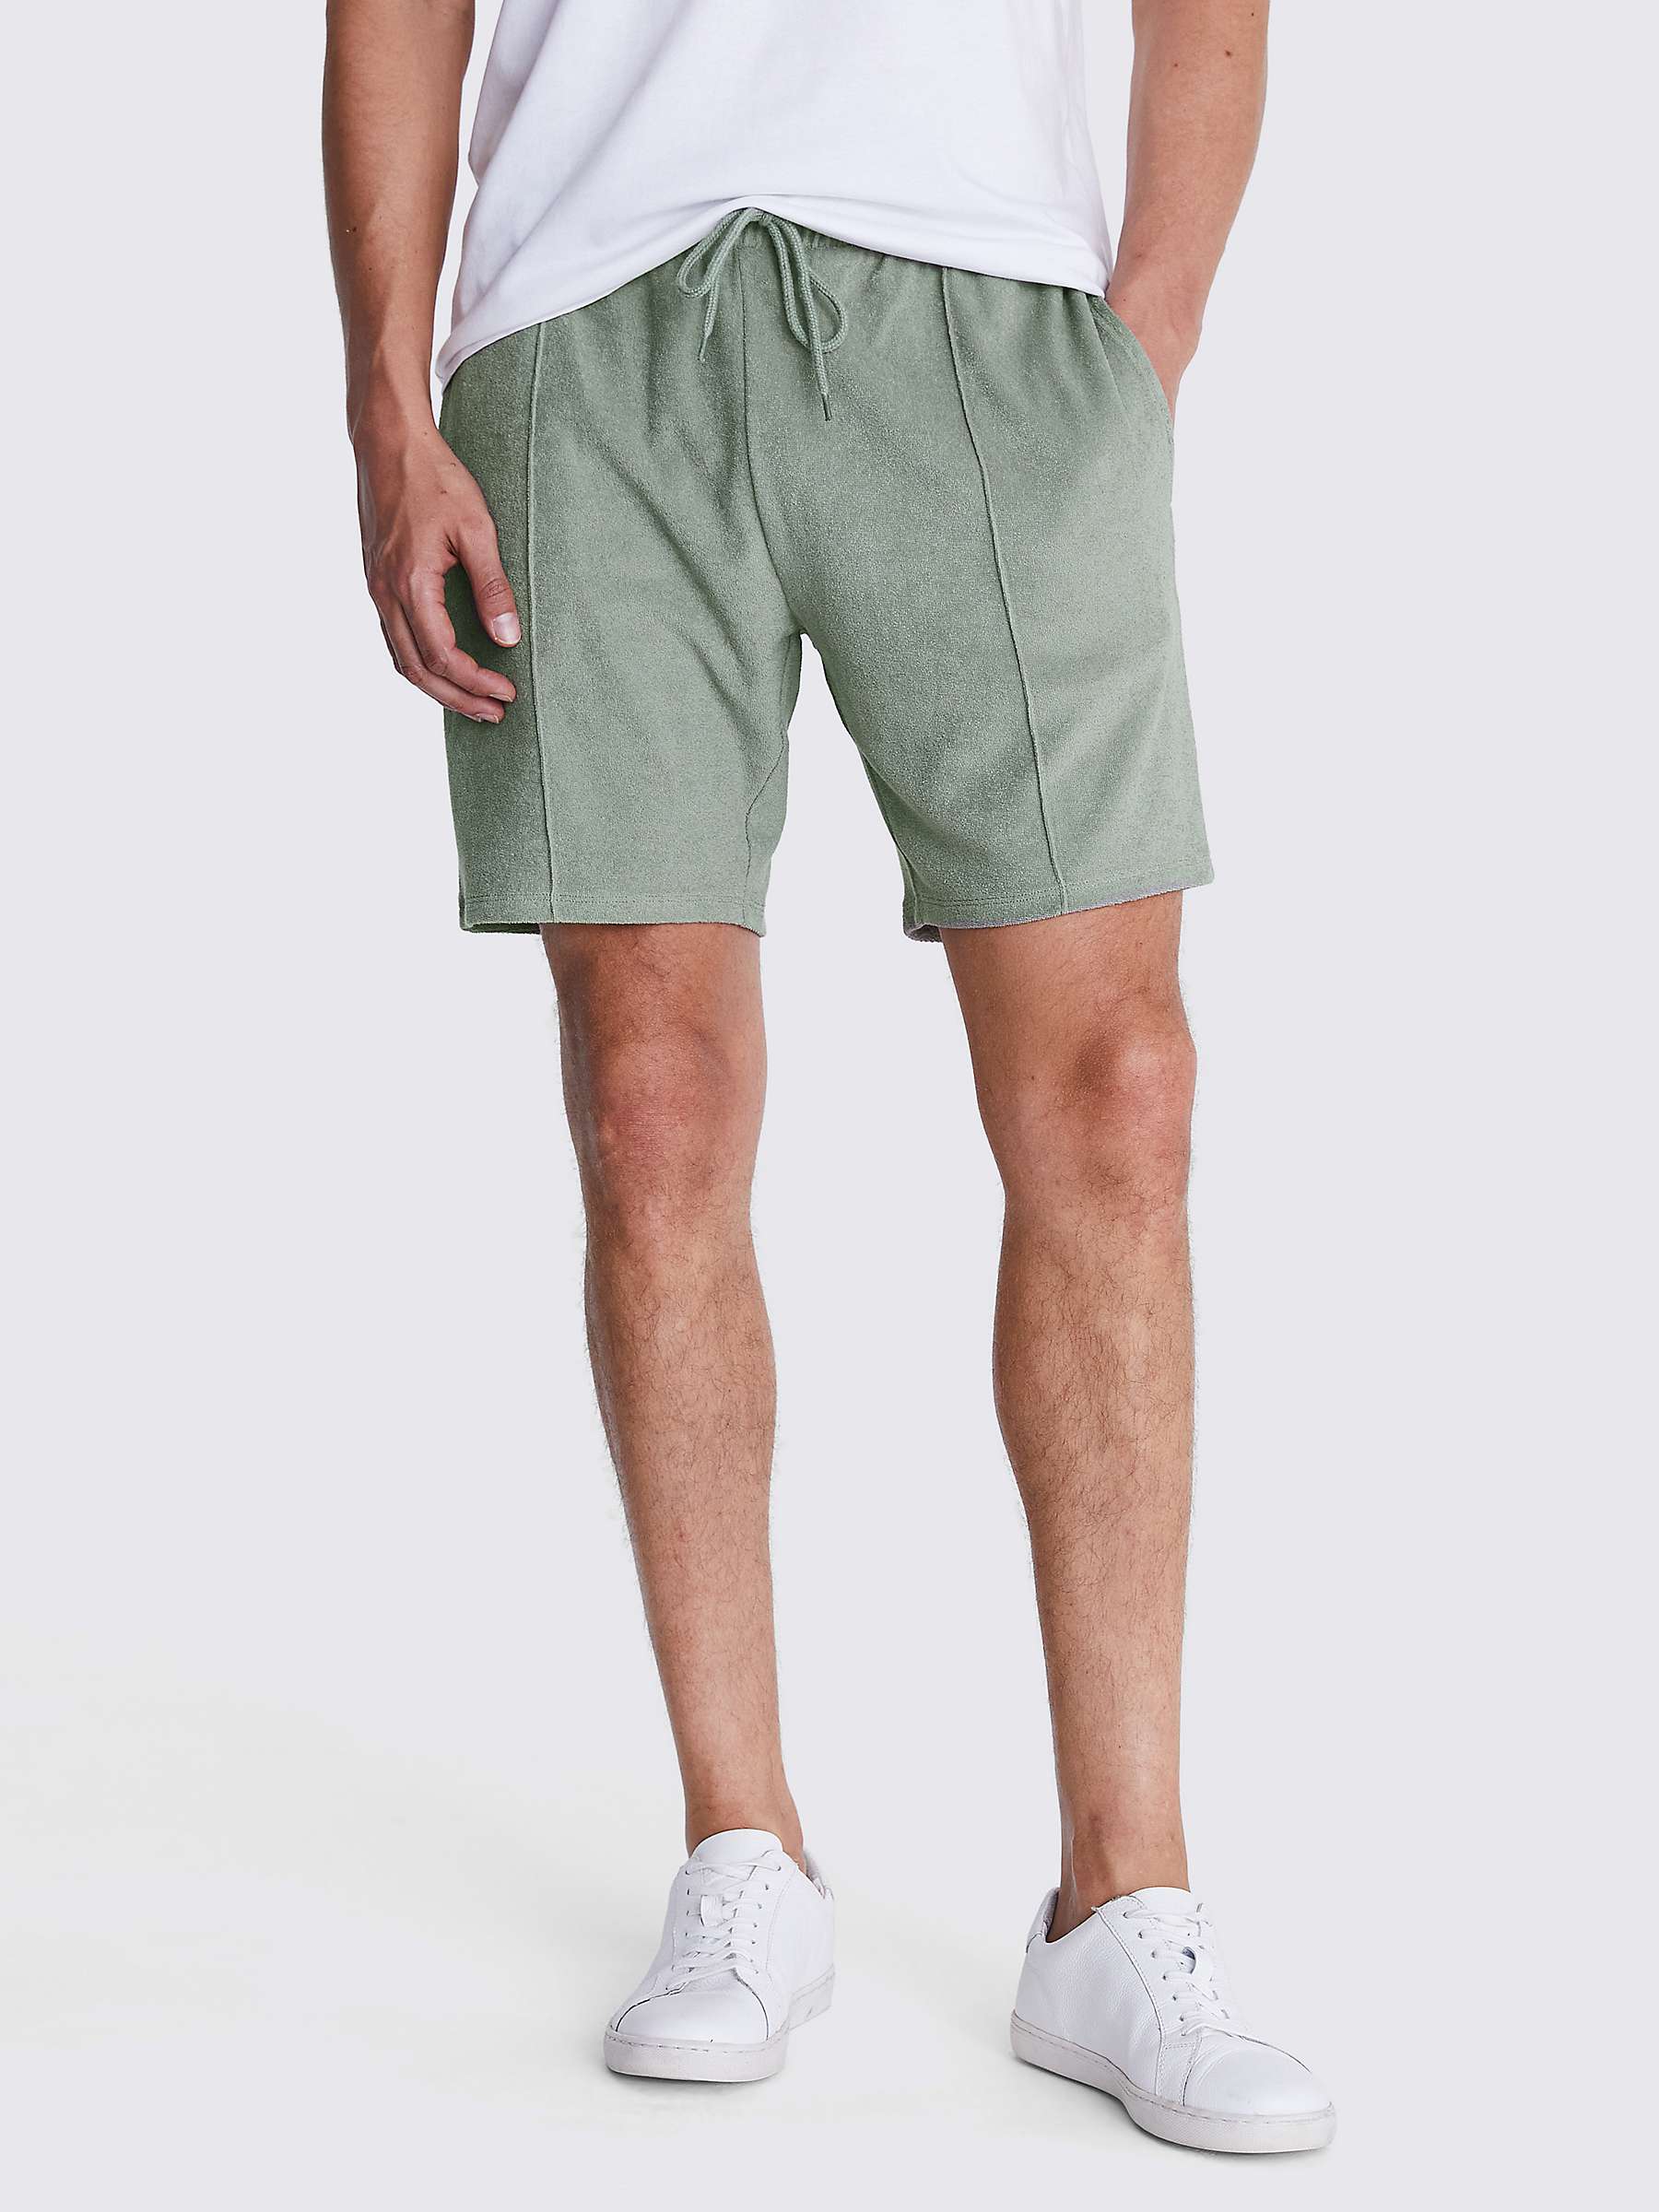 Buy Moss Terry Towelling Shorts Online at johnlewis.com